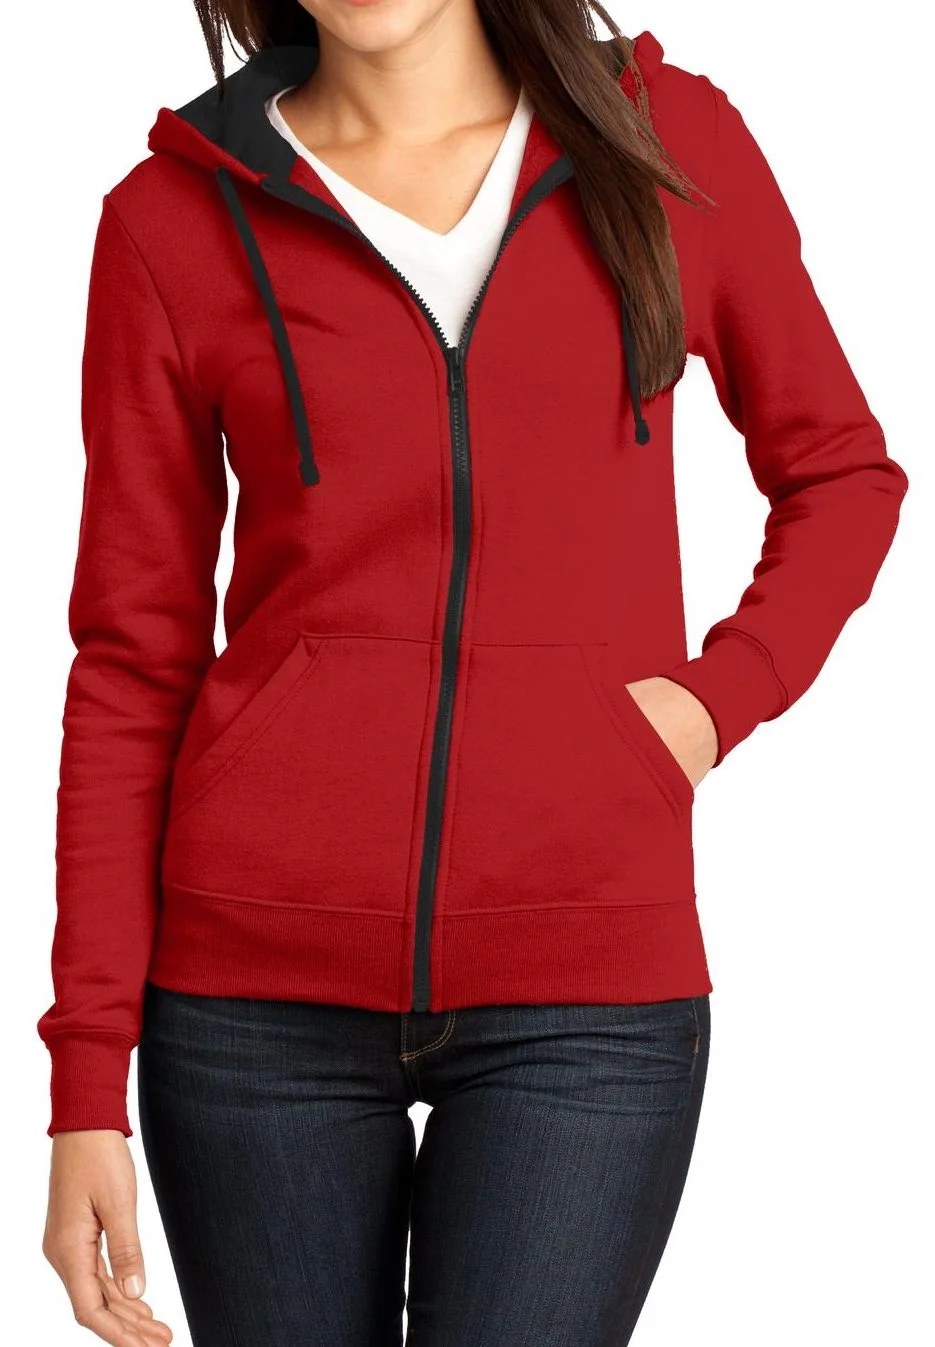 Customized Hoodies - Bangladesh Factory, Suppliers, Manufacturers